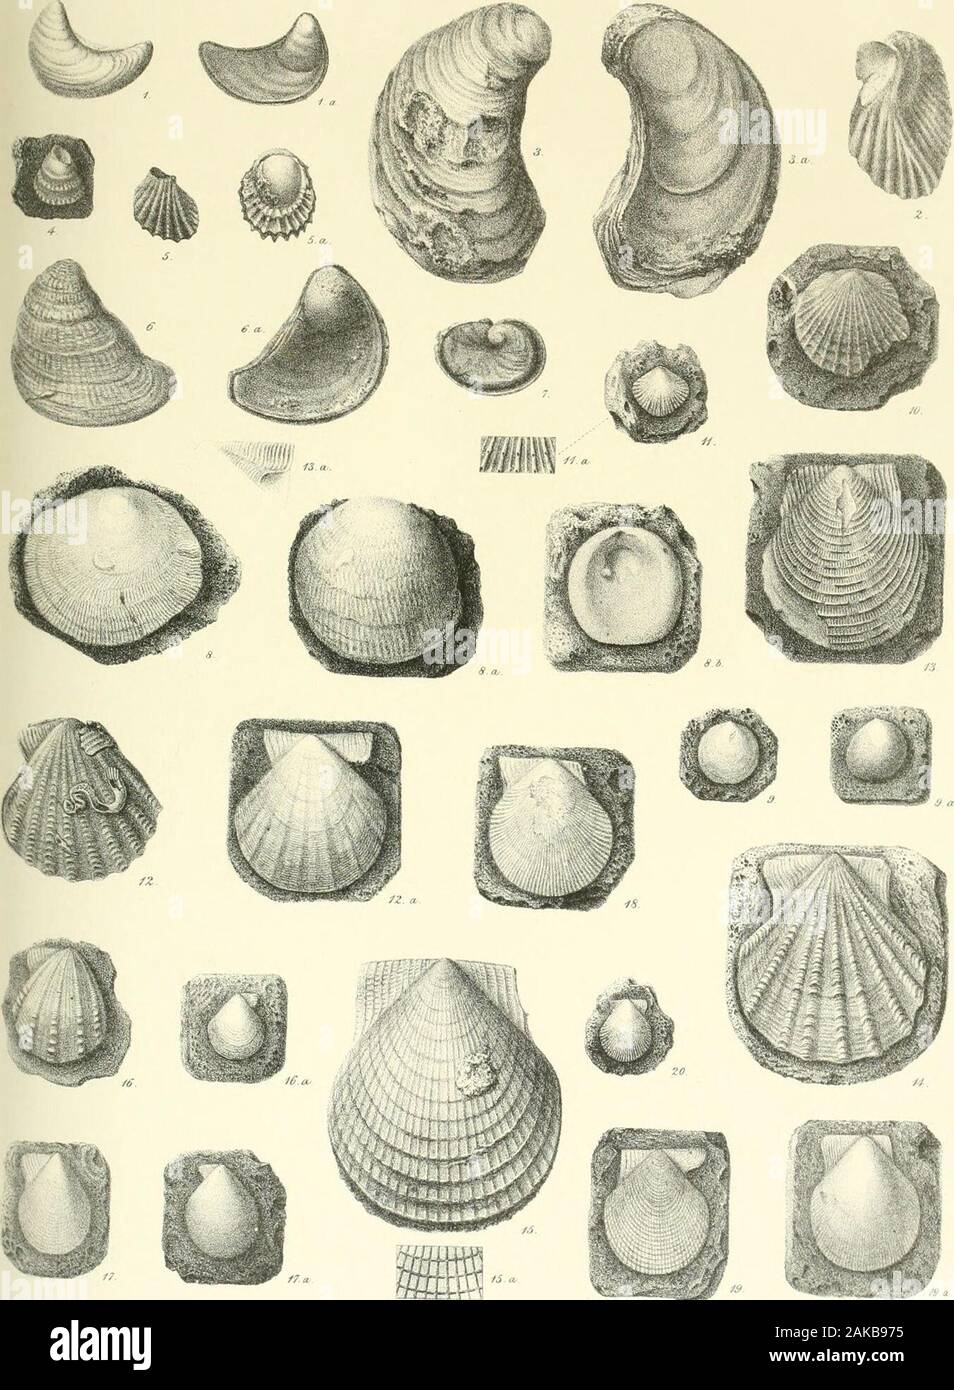 A monograph of the Mollusca from the Great Oolite chiefly from Minchinhampton and the coast of Yorkshire . separates it from other sub-genera of Area ; in Cuculleea theledge is posterior.p. 75. Both Ci/pricardit Bathonica, dOrb. and C. cordifurmis,T)esh., occur in the Inferior Oolite ofthe Cotteswolds but in different beds, further observations have induced us to regard them asonly varieties of the same species induced by peculiarities of the beds in which they occur. 7 8, 8 aSt. TAB. I. Fig. 1, la. Ostrea acuminata, page 3. 2, „ gregarea, var.,p. 4. 3, 3 a. ,, Sowerbii,jo. 4. 4, „ rugosa, j». Stock Photo